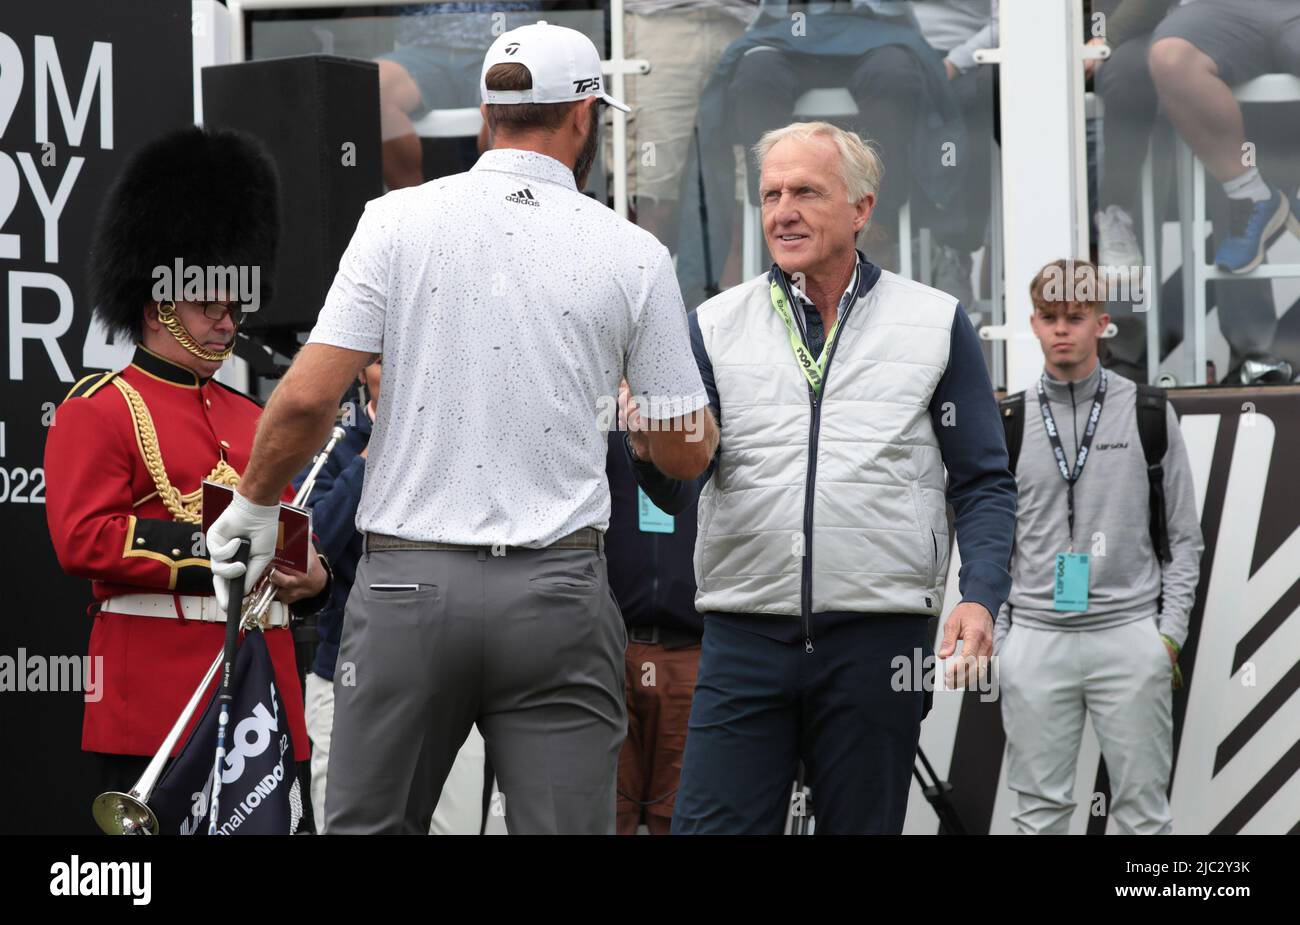 London, UK. 09th June, 2022. Australian Greg Norman shakes American Dustin Johnson's hand on the1st tee during the1st round of the inaugural LIV Golf event at the Centurion club in Hertfordshire on Thurssday, June 09, 2022.The event is 12 teams of four players competing over 54 holes for a prize pot of $25million dollars to the winning team. Photo by Hugo Philpott/UPI Credit: UPI/Alamy Live News Stock Photo